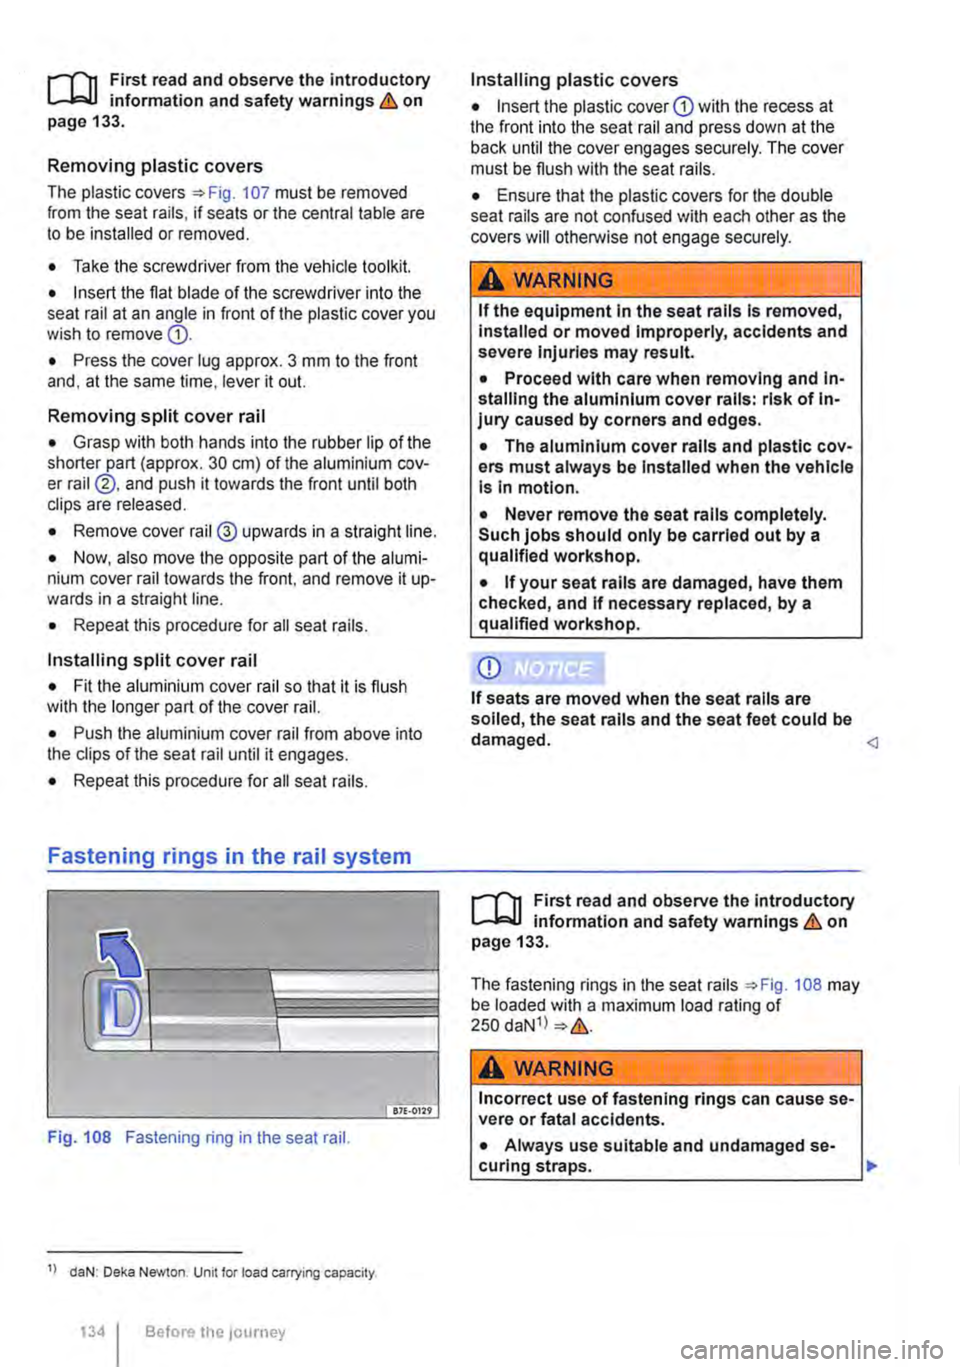 VOLKSWAGEN TRANSPORTER 2013  Owners Manual t"""""fl1 First read and observe the introductory l..--bll information and safety warnings & on page 133. 
Removing plastic covers 
The plastic covers=:. Fig. 107 must be removed from the seat rails, 